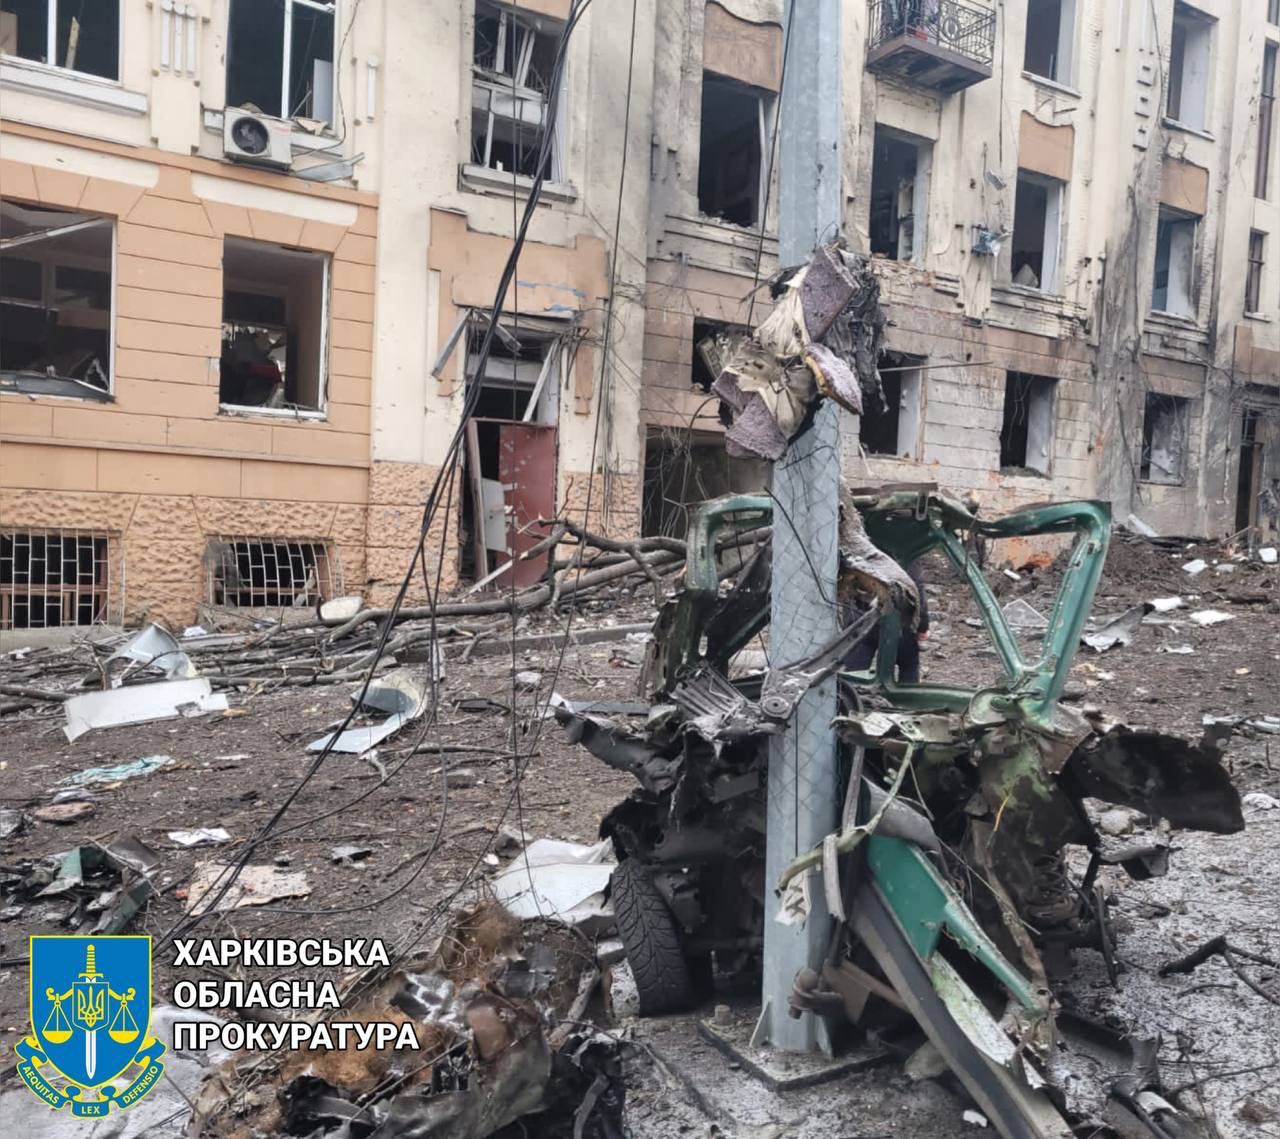 Russians shelled the city center of Kharkiv, at least 4 civilians were injured: photos